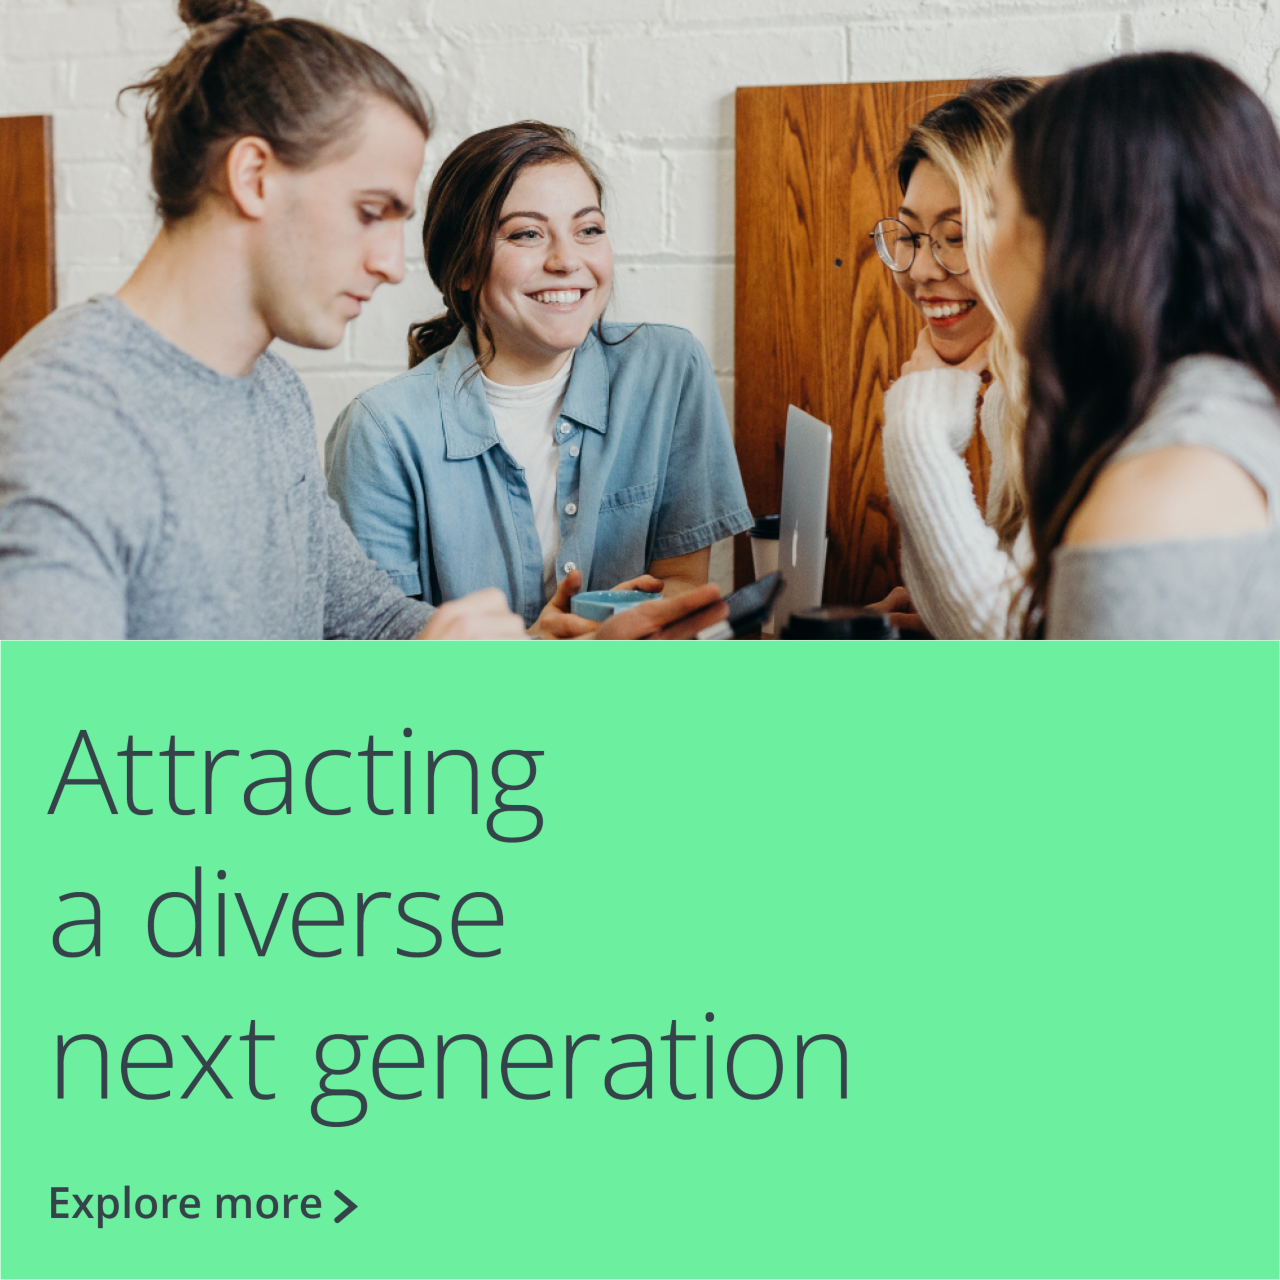 Section 4: Attracting  a diverse  next generation